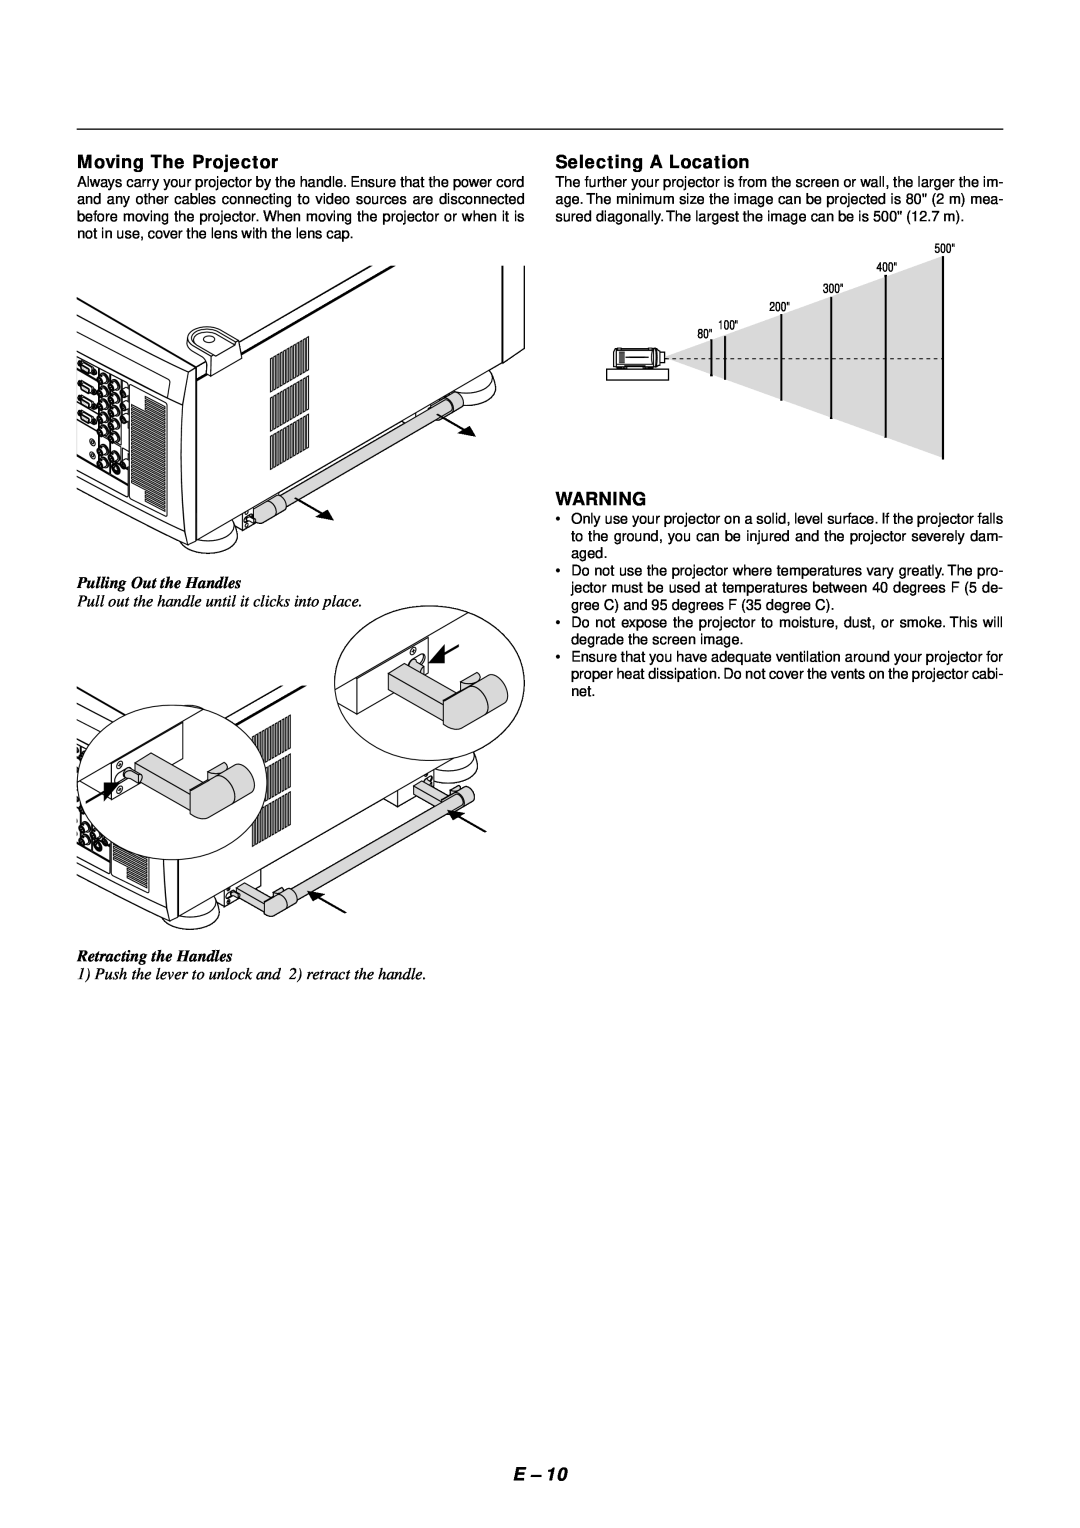 NEC SX4000 user manual Moving The Projector, Selecting A Location, Pulling Out the Handles, Retracting the Handles 